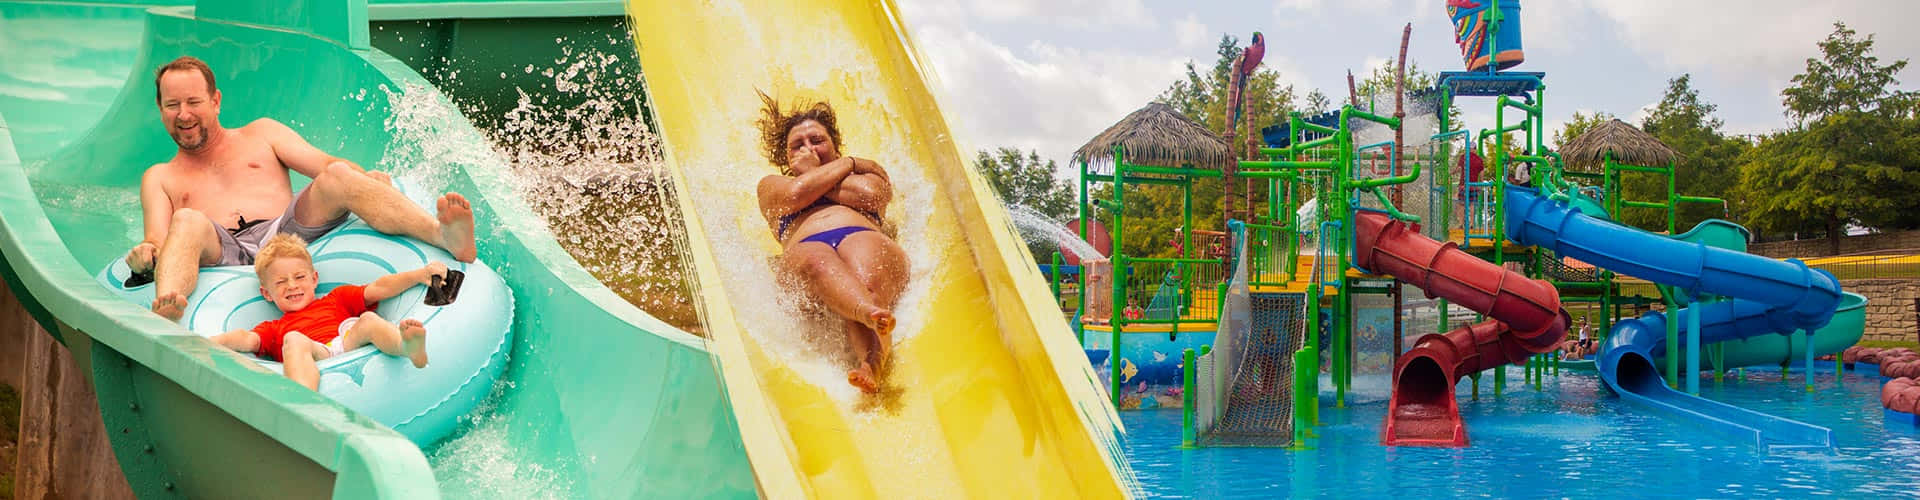 Get Lost in the Colorful Beauty of Hawaiian Falls Water Park in Garland Wallpaper